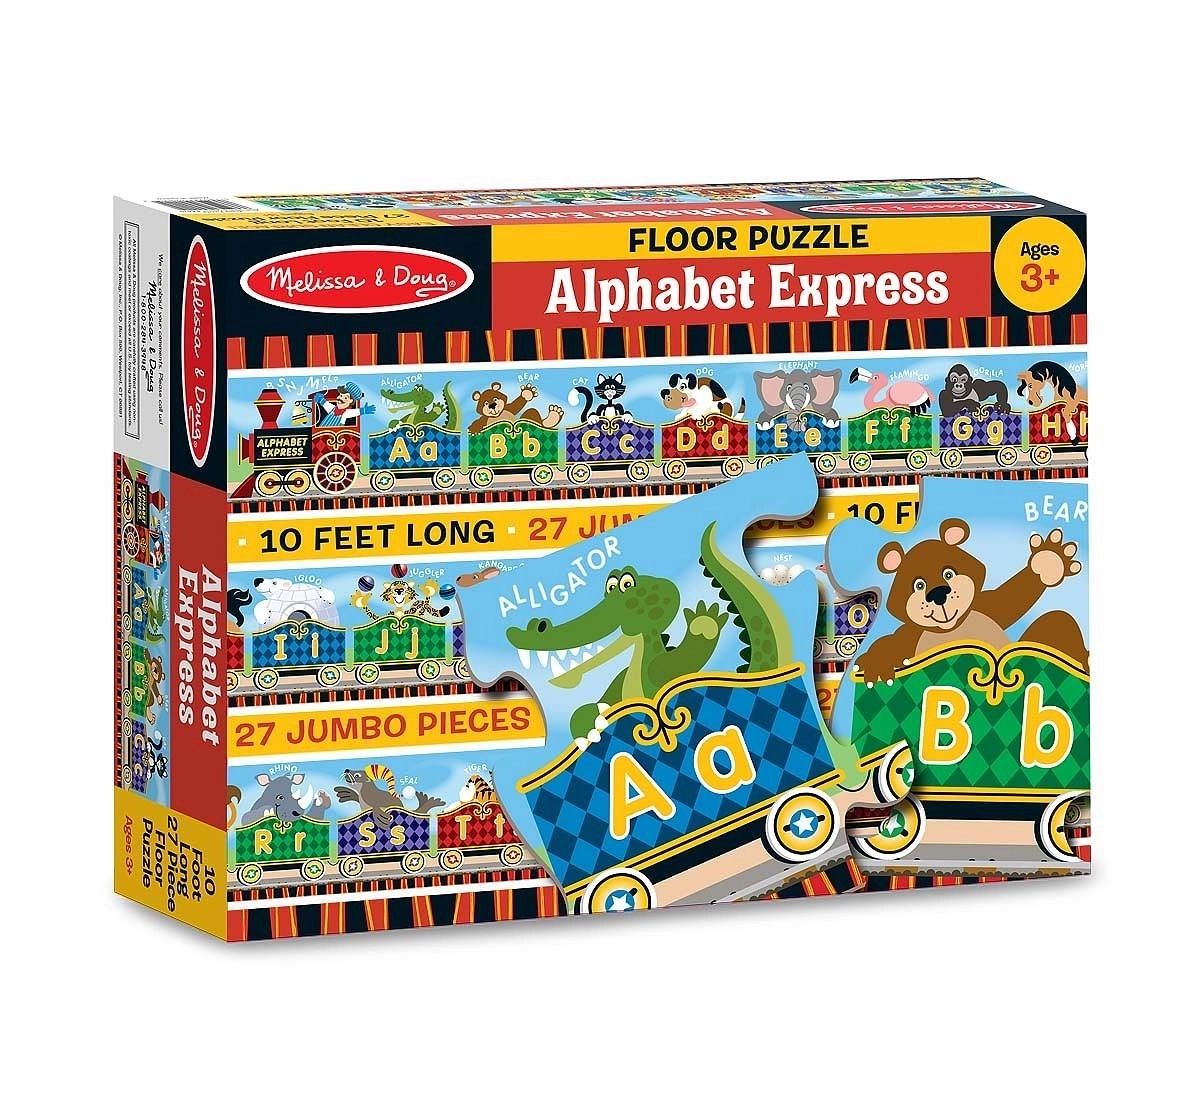 Melissa & Doug : Alphabet Express Floor Puzzle Early Learner Toys for Kids Age 3Y+